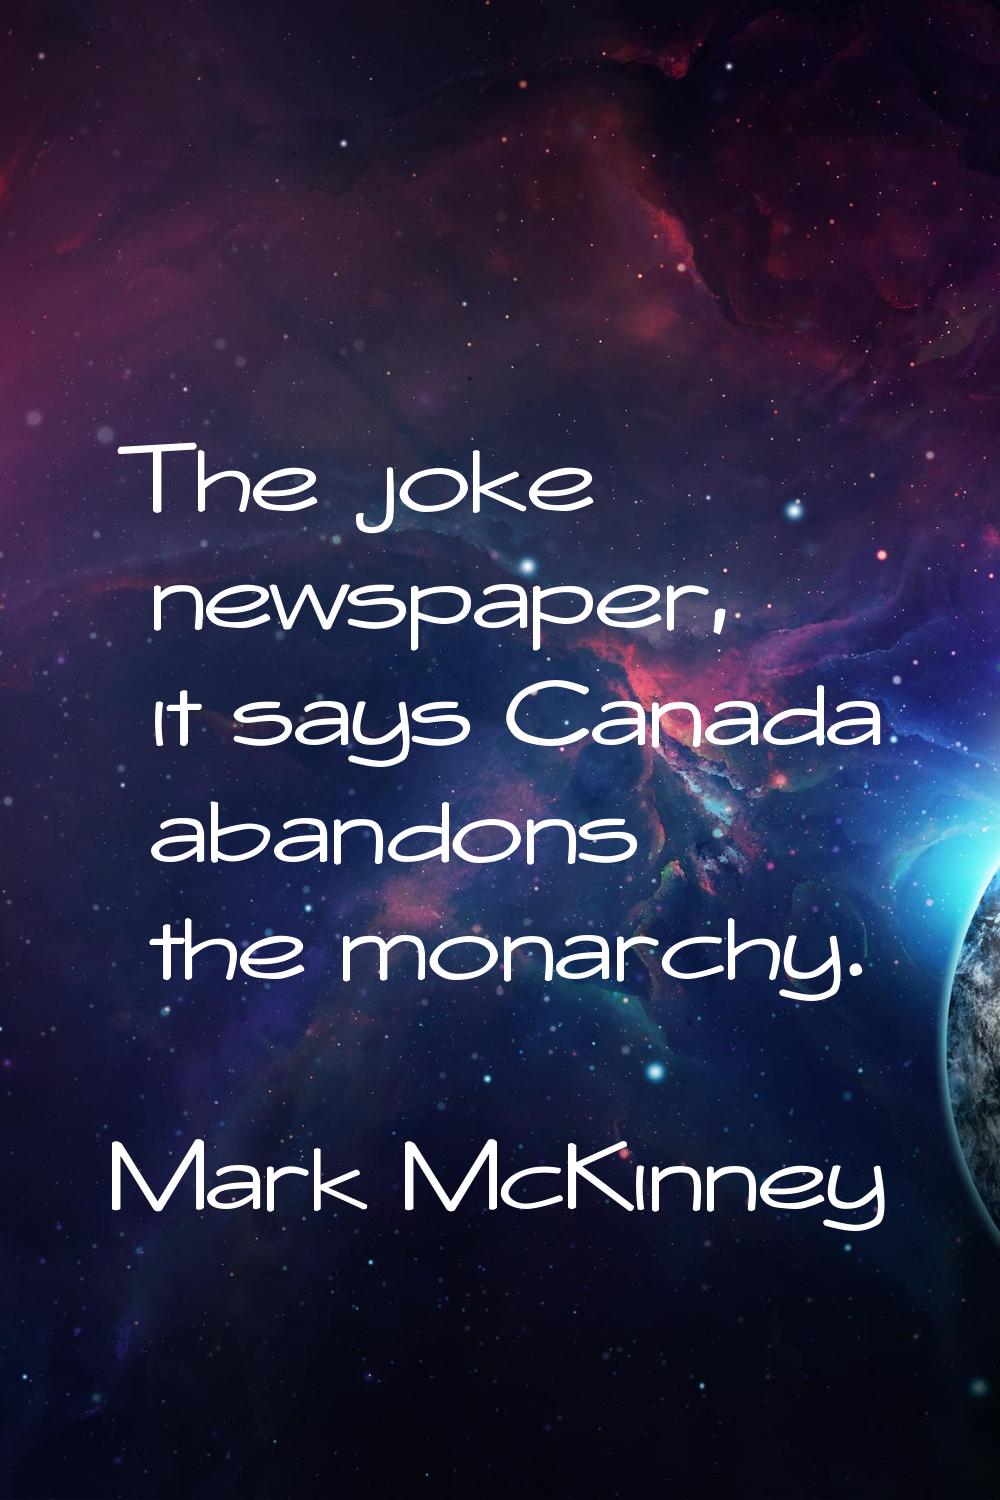 The joke newspaper, it says Canada abandons the monarchy.